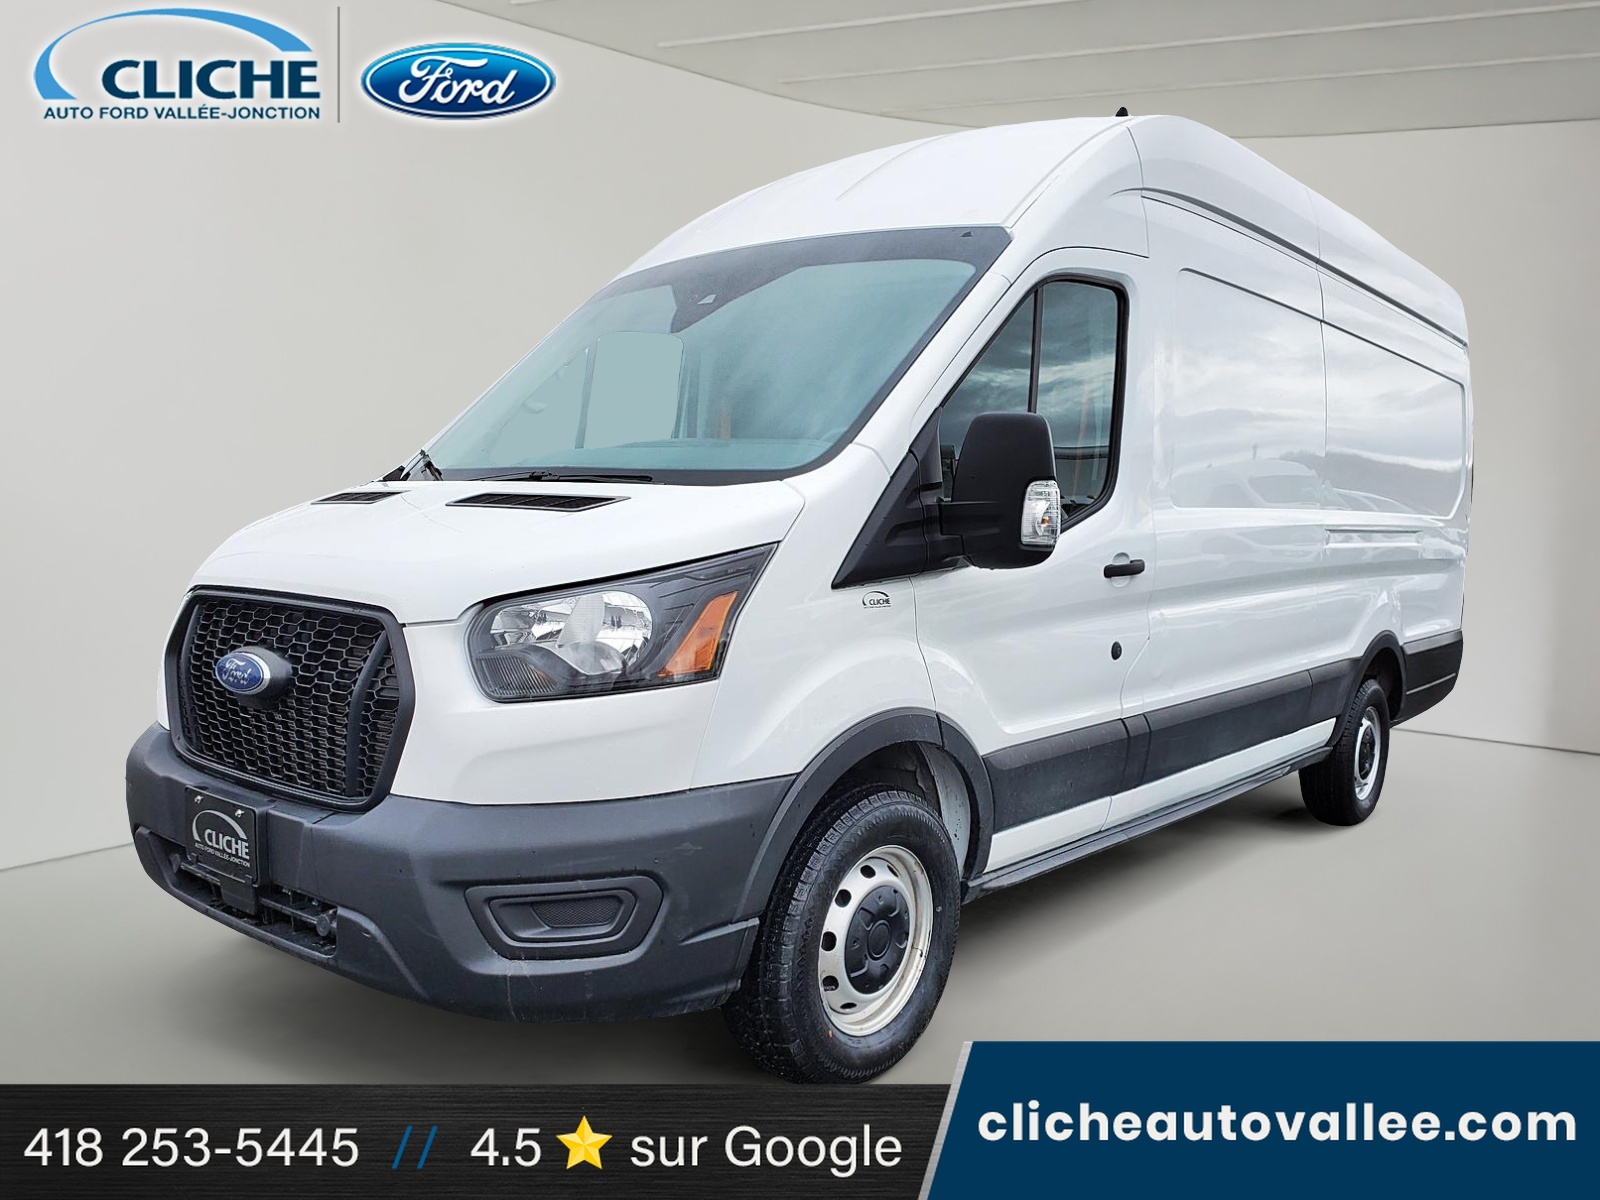 2021 Ford Transit T-250, HIGH ROOF, 14 PIEDS DE PLANCHER